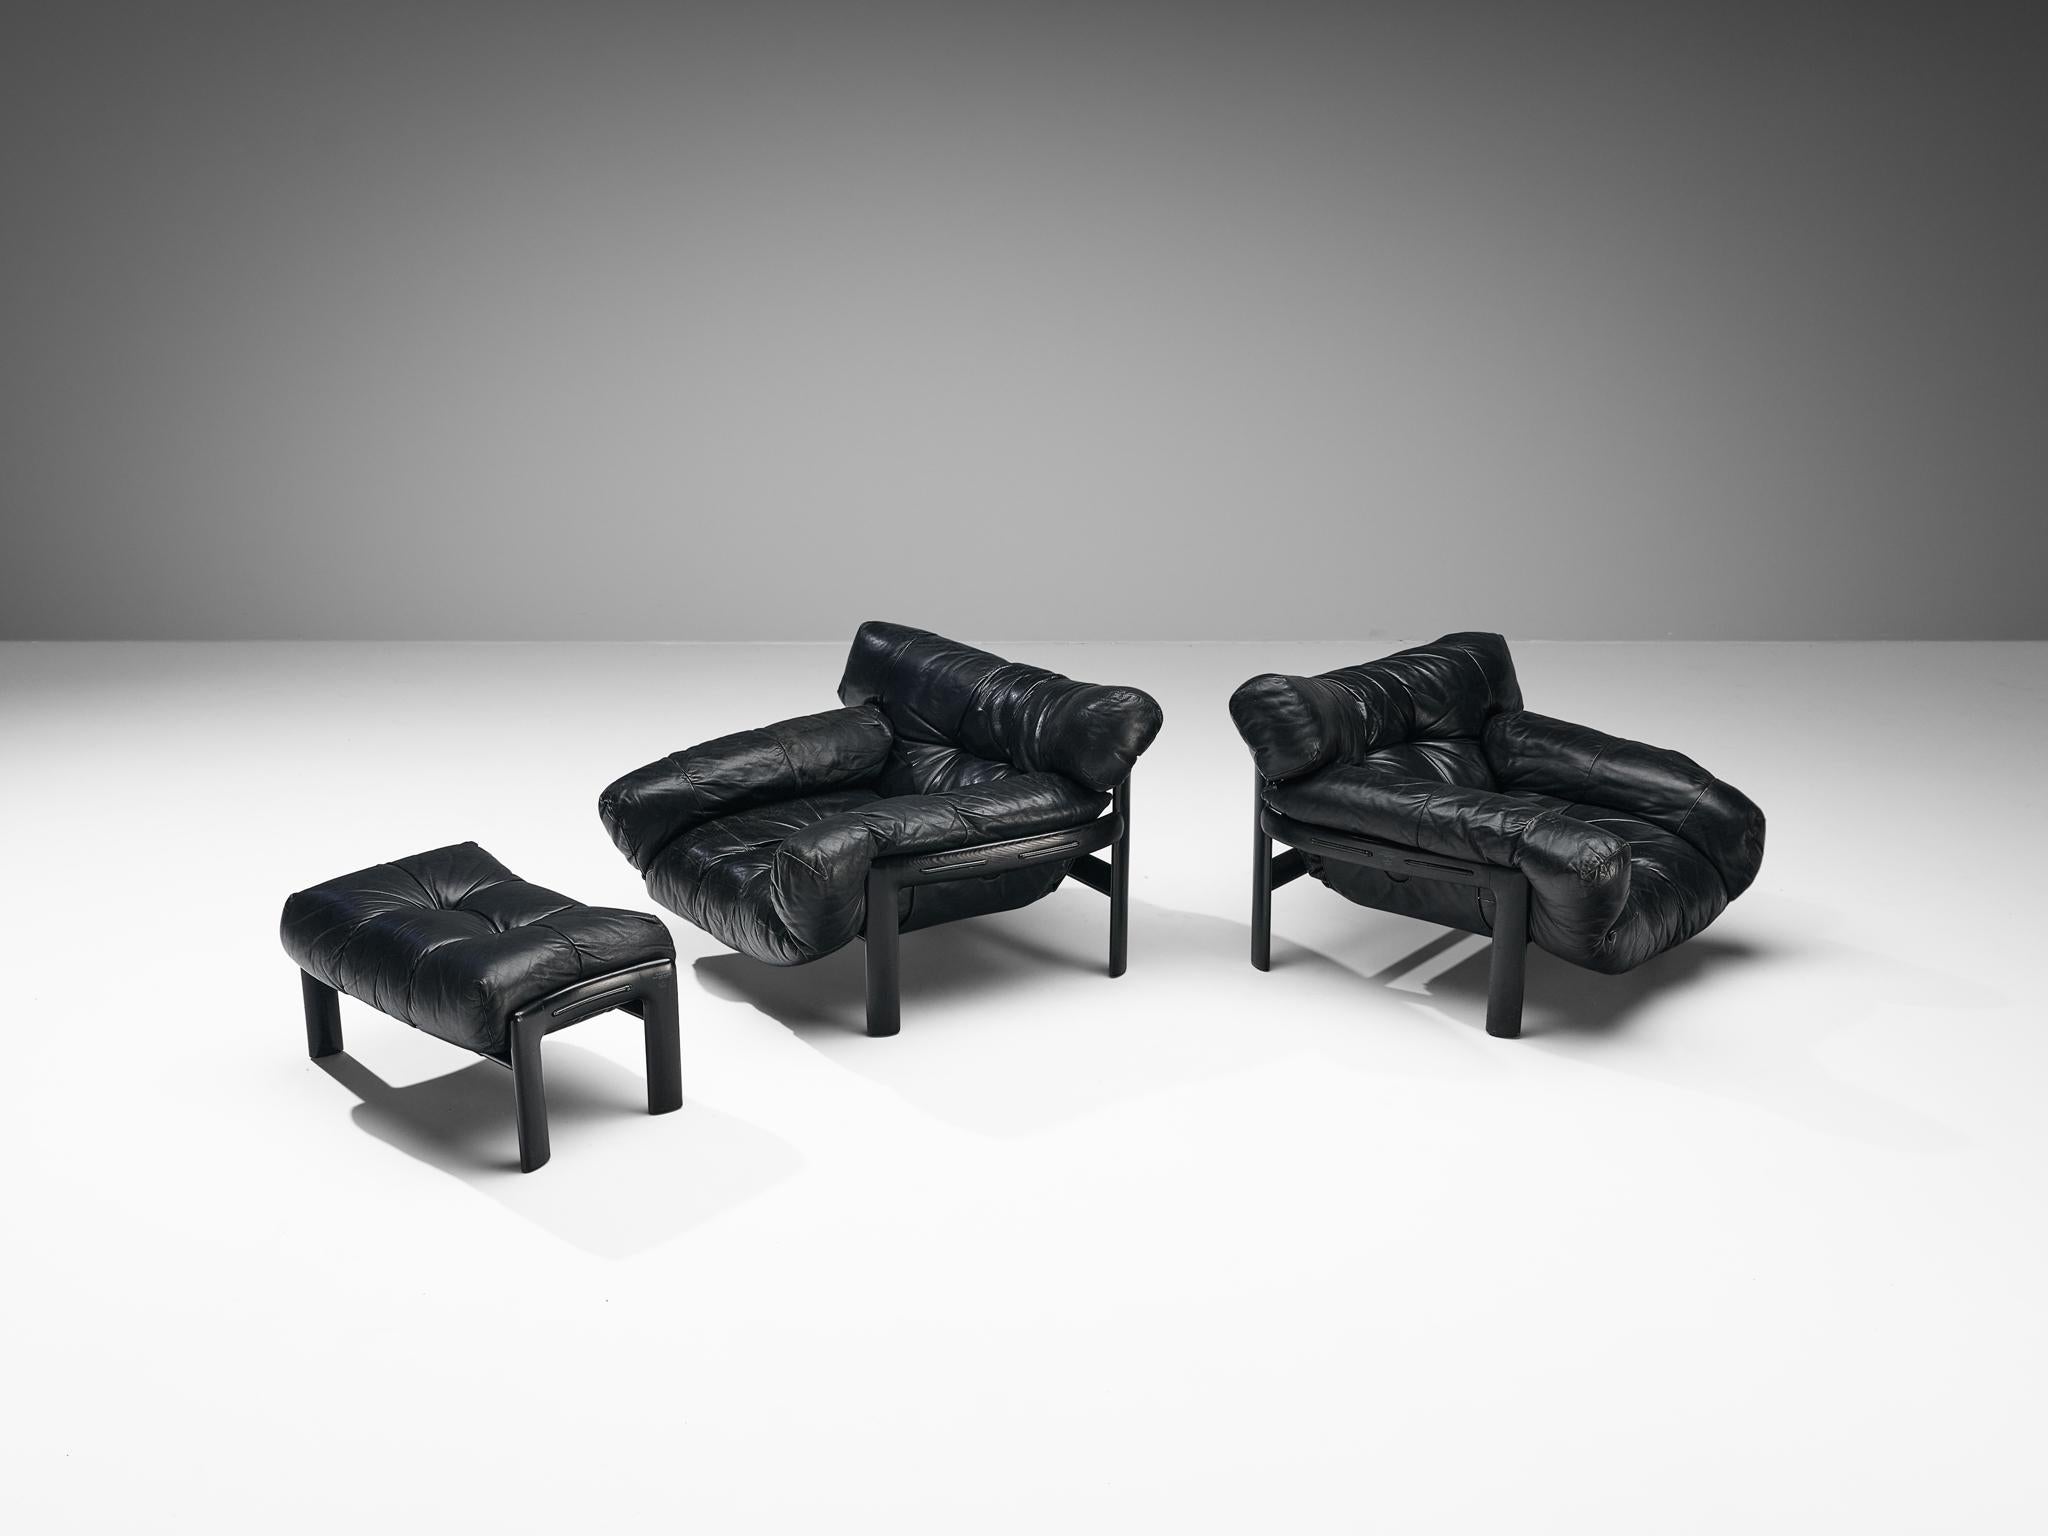 Angelo Mangiarotti e Chiara Pampo for Rosenthal, pair of 'Légère' lounge chairs with ottoman, lacquered ash, leather, Italy, 1978

Sturdy lounge chairs complemented with an ottoman designed by Angelo Mangiarotti and Chiara Pampo and manufactured by